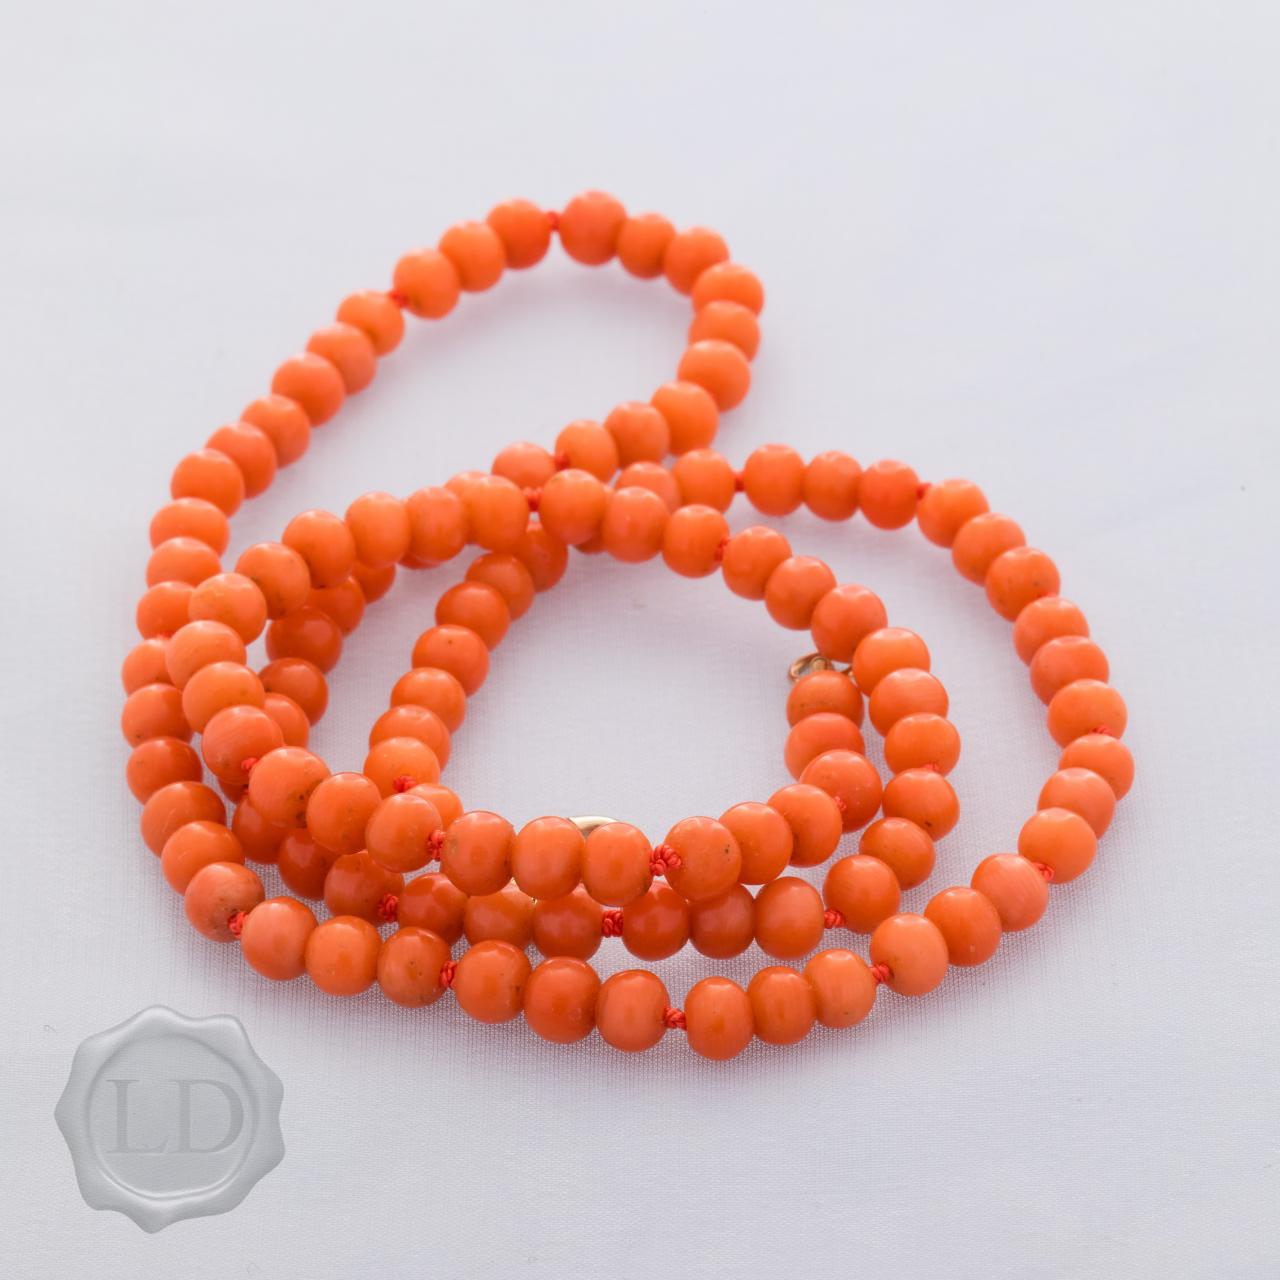 Coral necklace